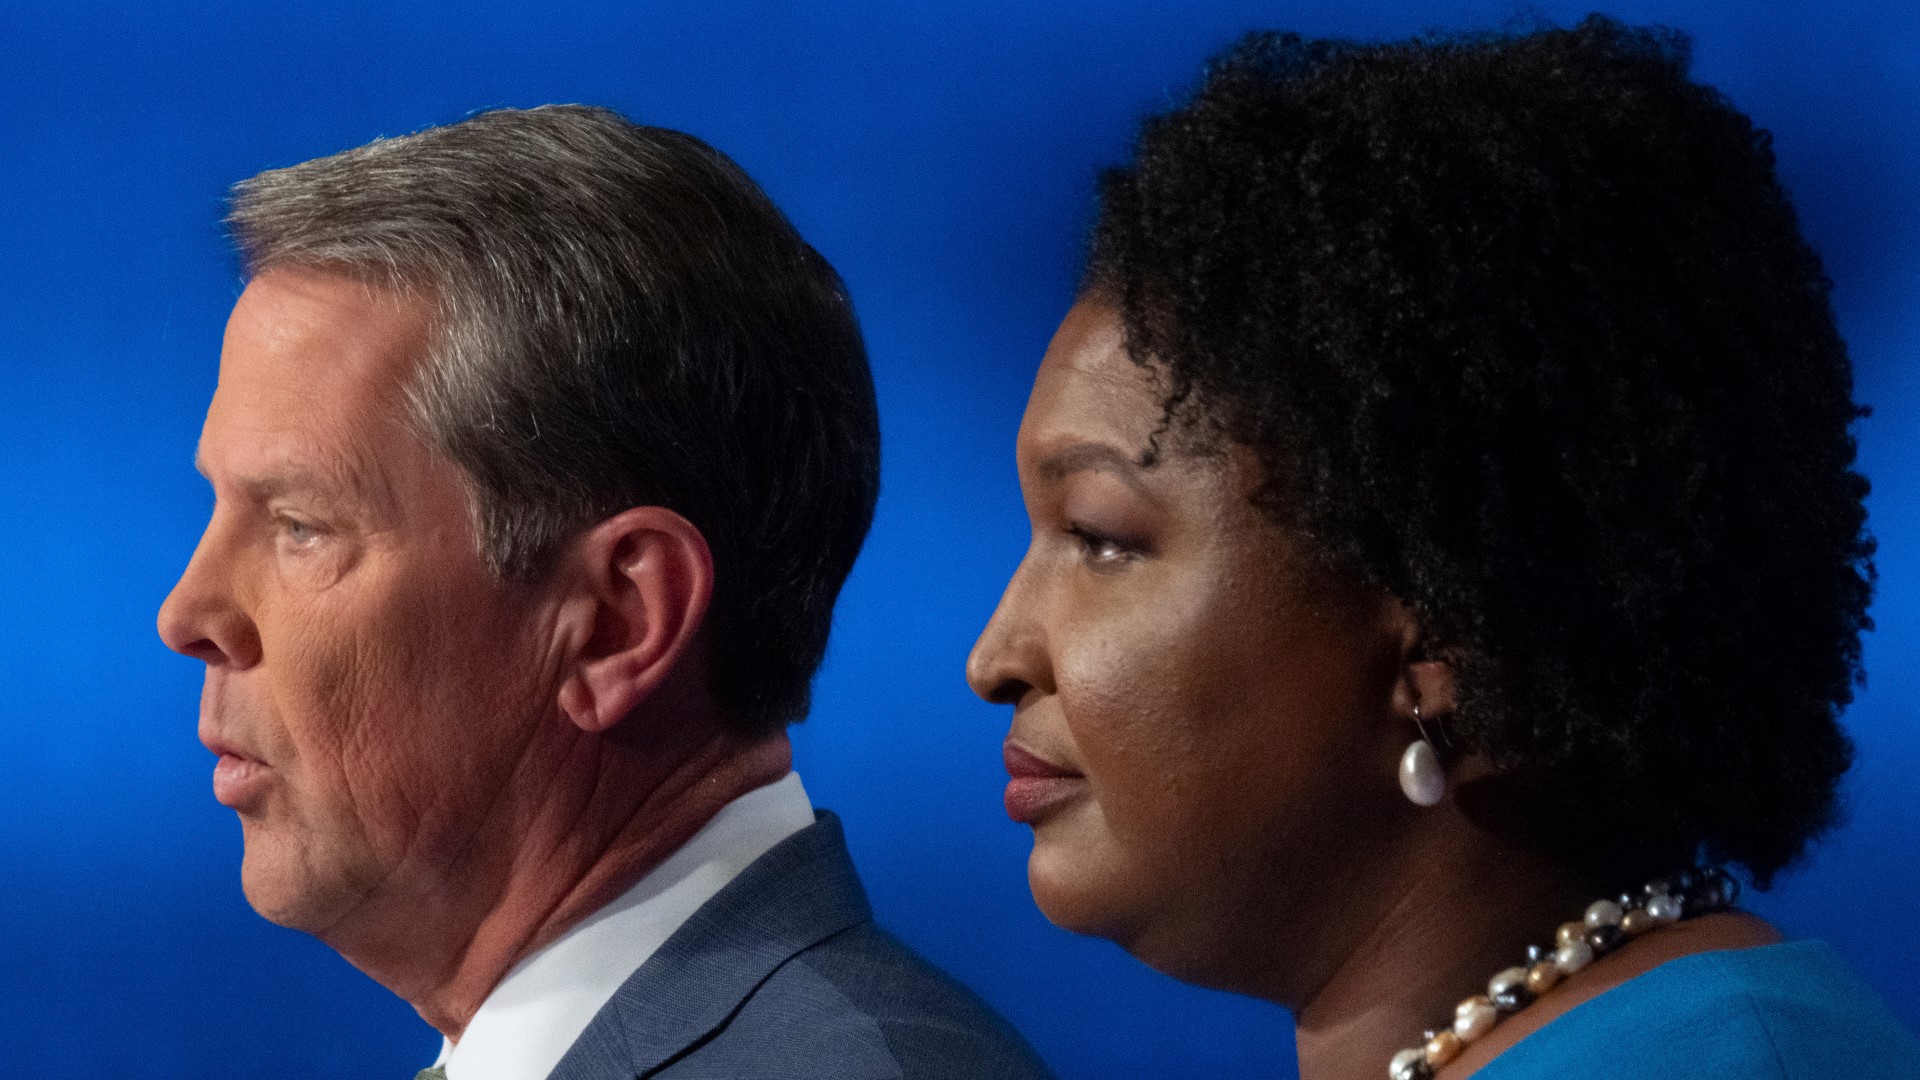 Republican Gov. Brian Kemp and Democratic challenger Stacey Abrams offered varying visions for Georgia on abortion, the economy and voting in a policy-heavy debate.